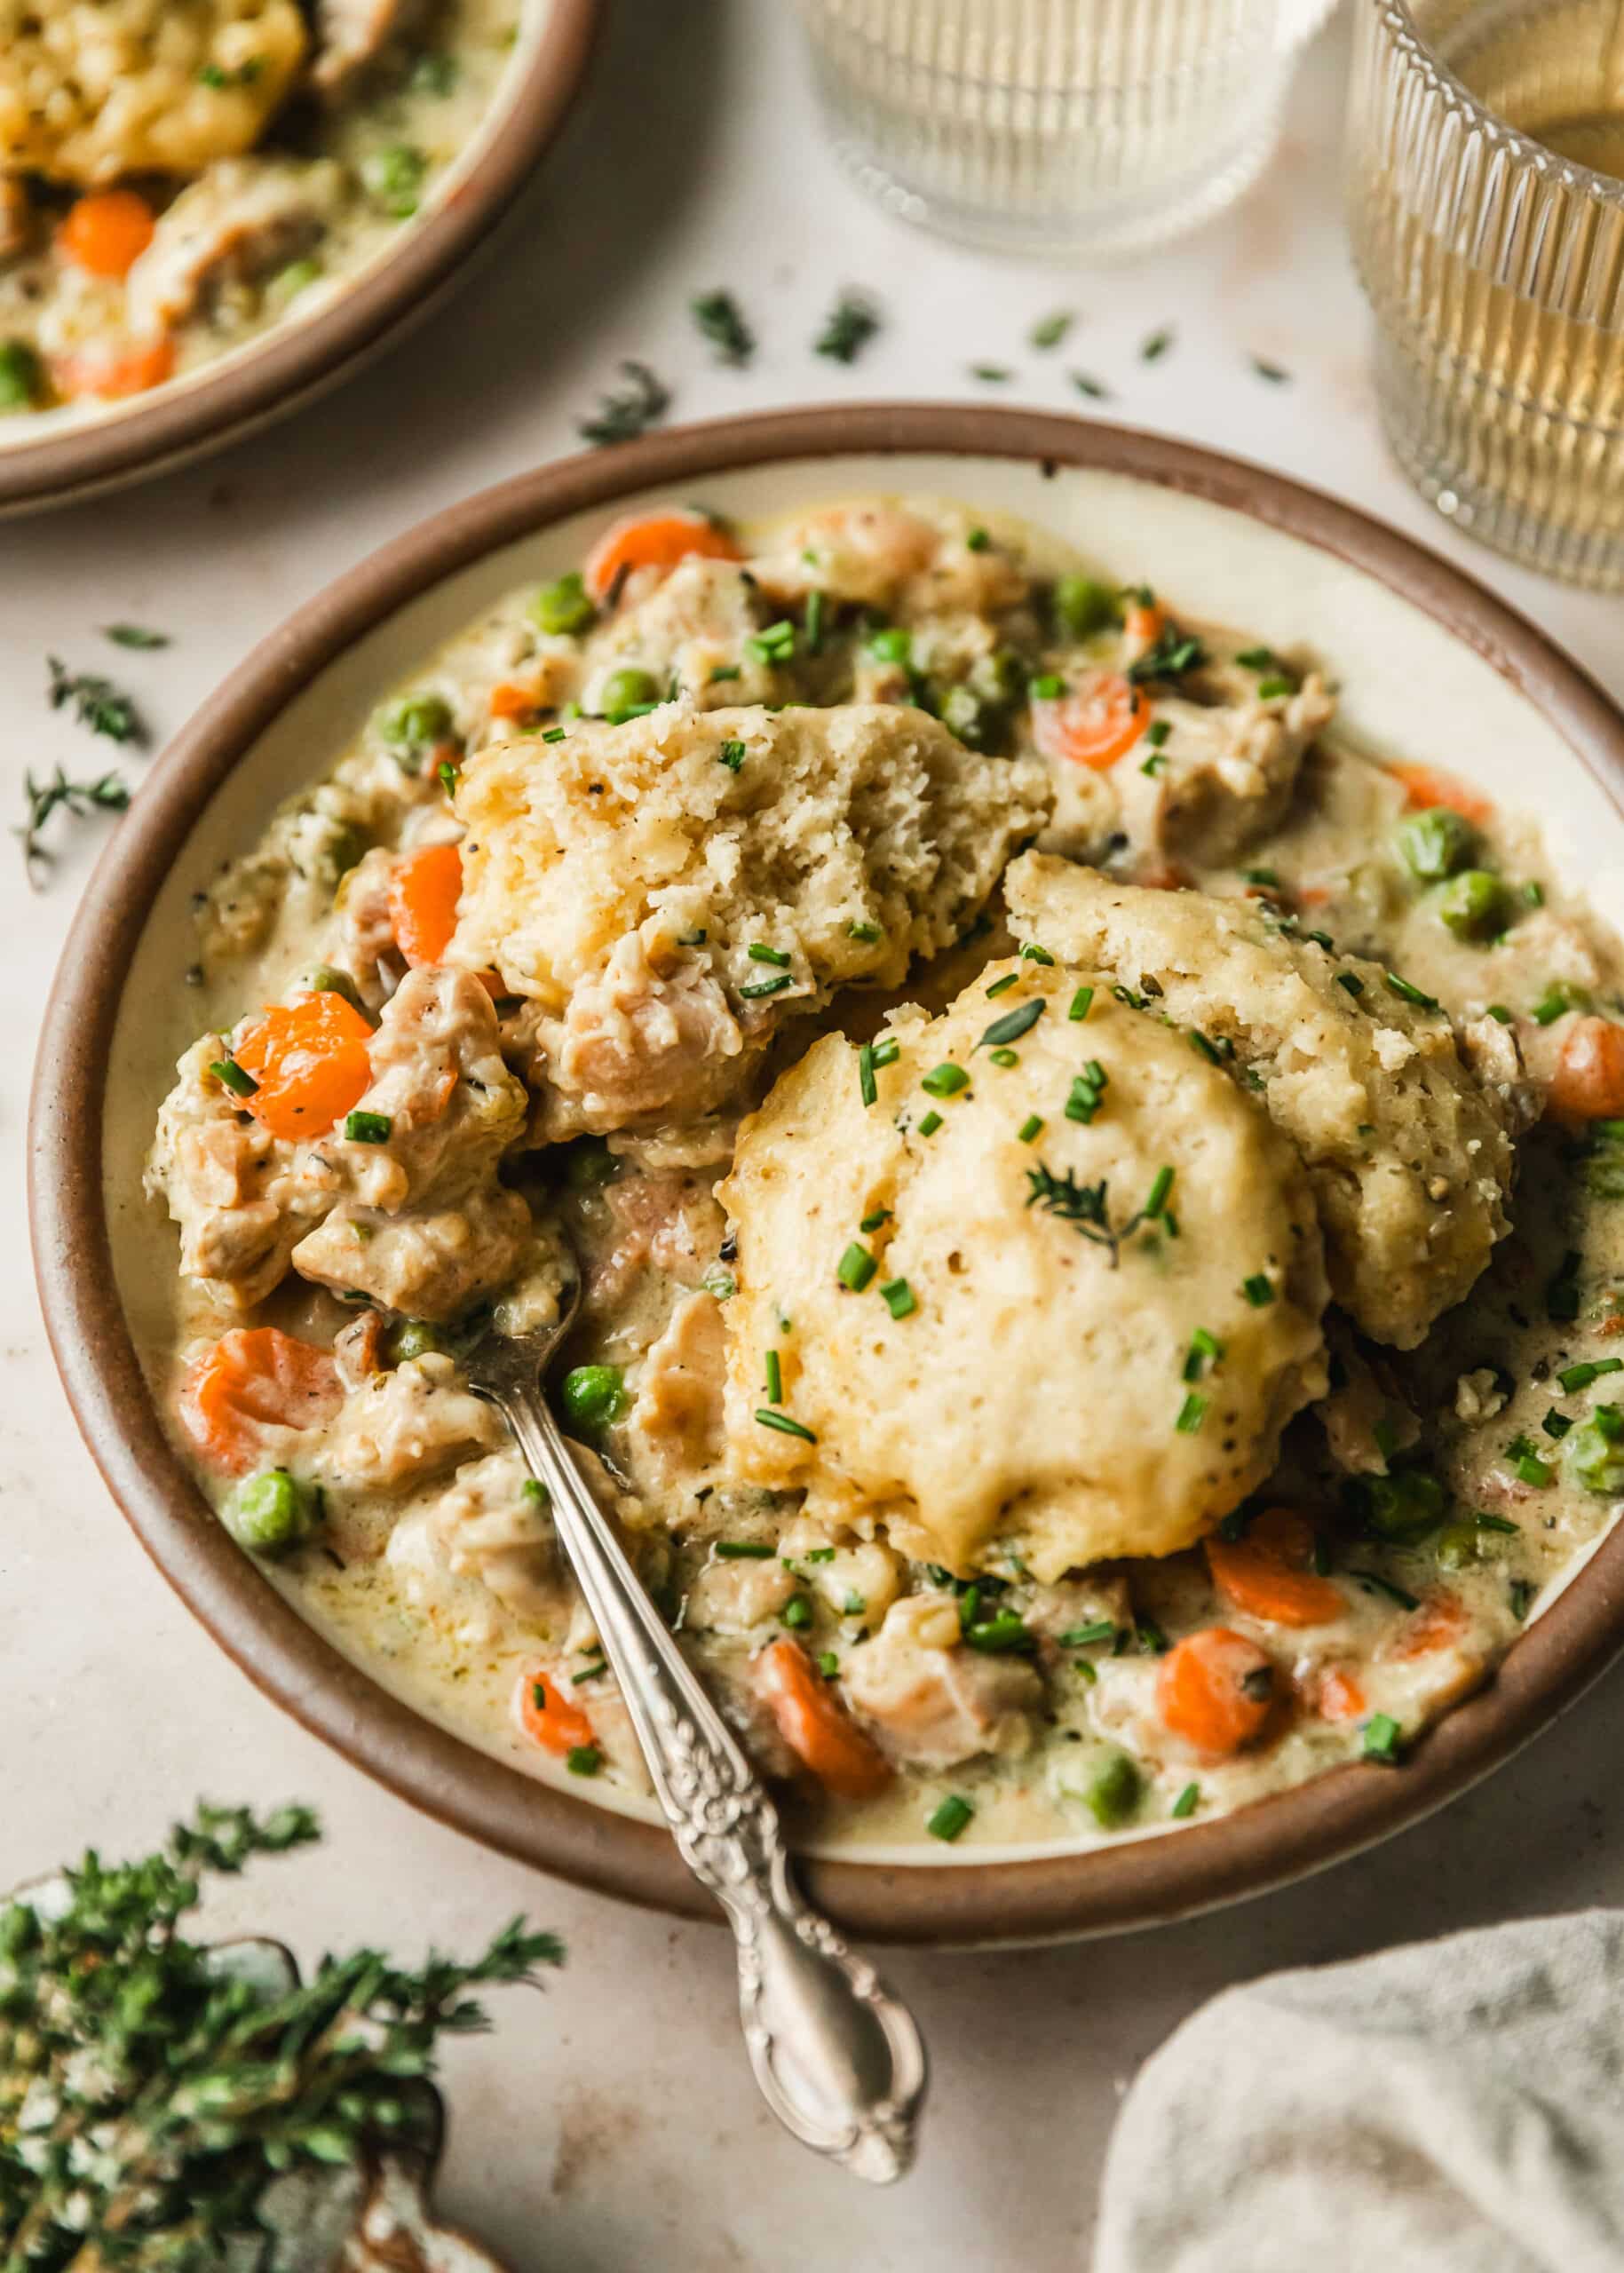 A brown plate of Dutch oven chicken and dumplings on a tan counter next to thyme, a beige linen, and glasses of white wine.